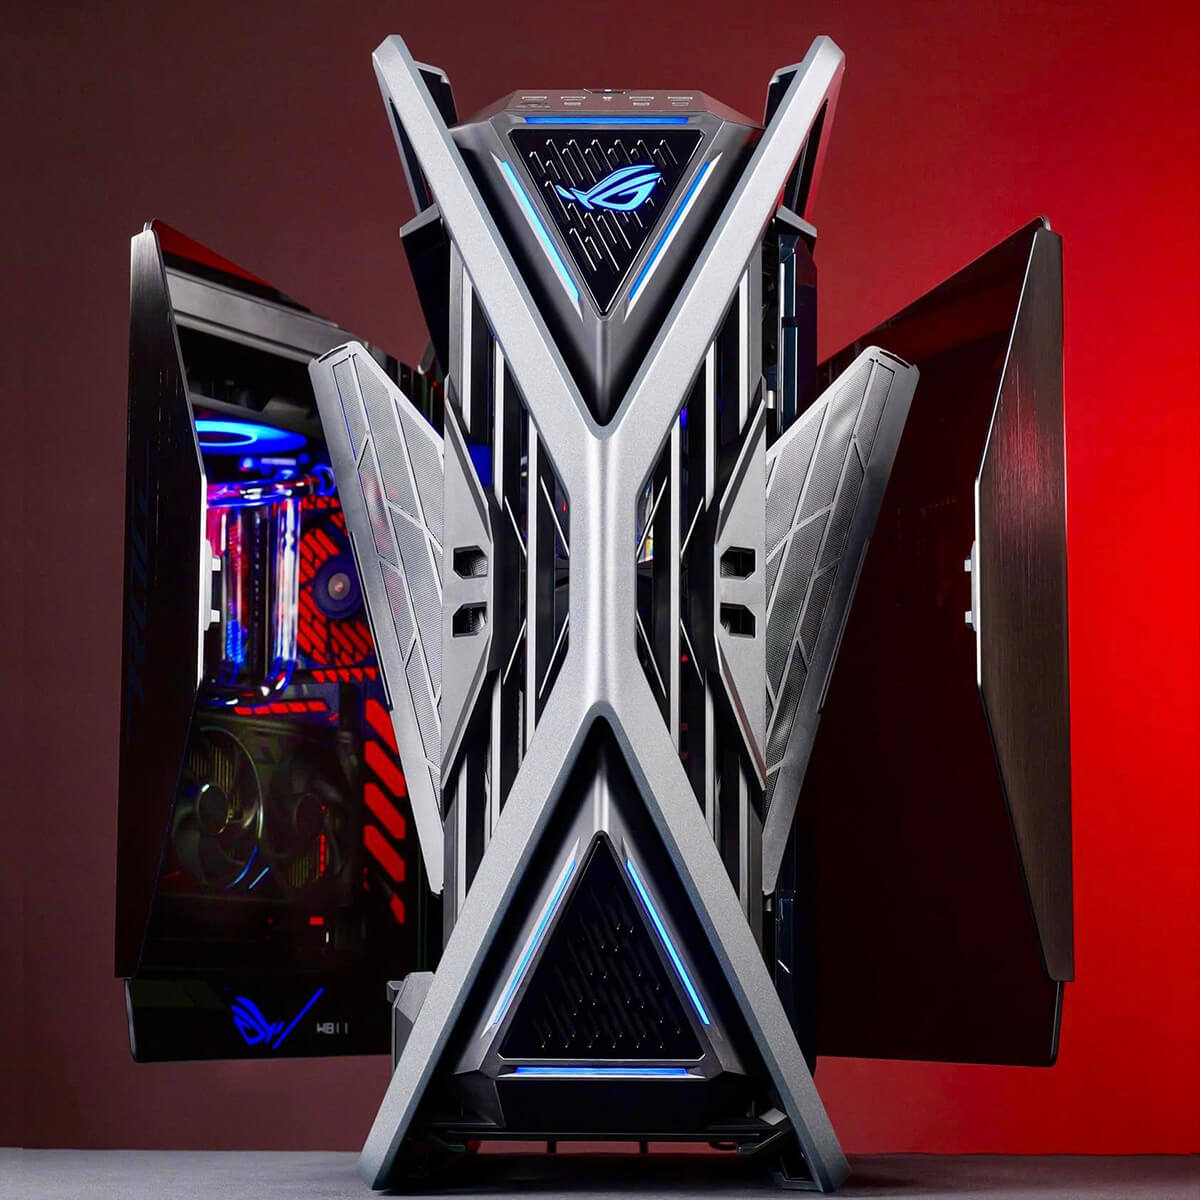 Front view of a power-ranger-liked ROG PC build